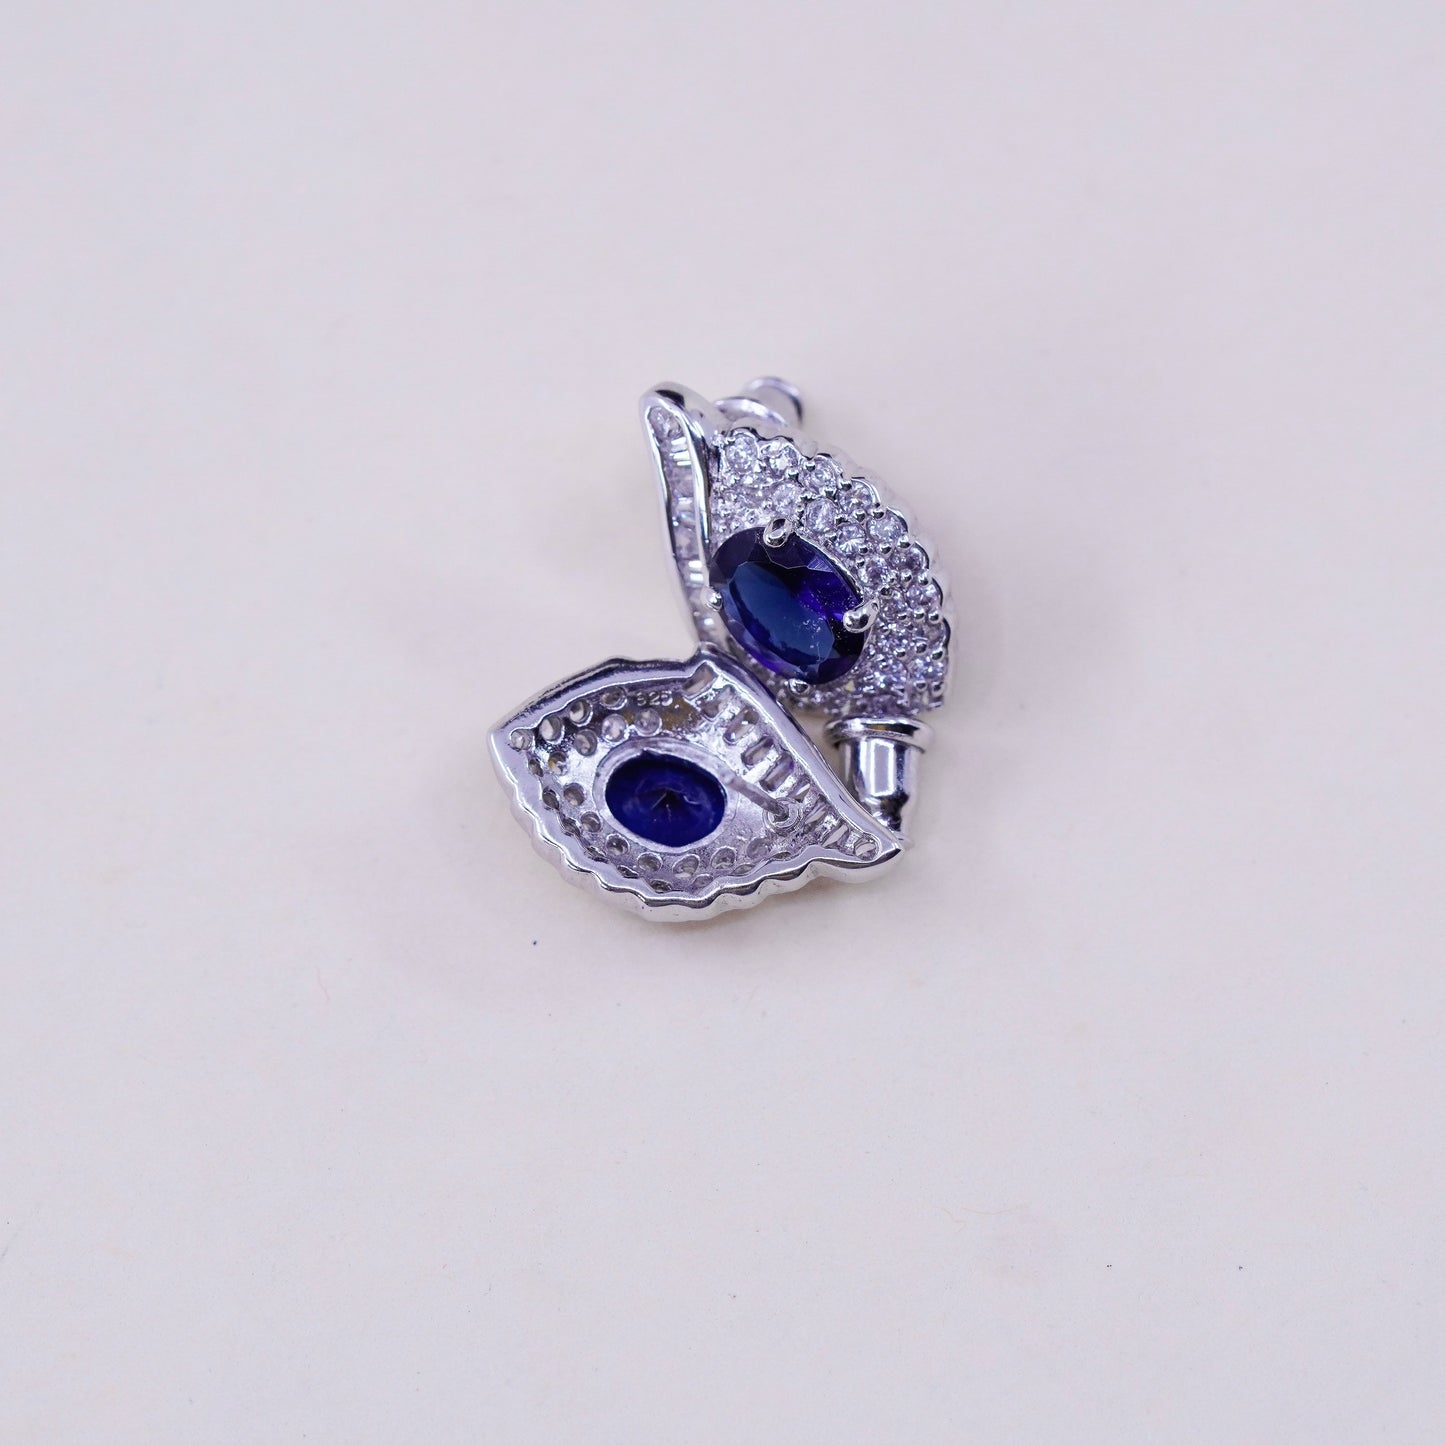 Sterling silver handmade earrings, 925 flower studs with cluster sapphire Cz